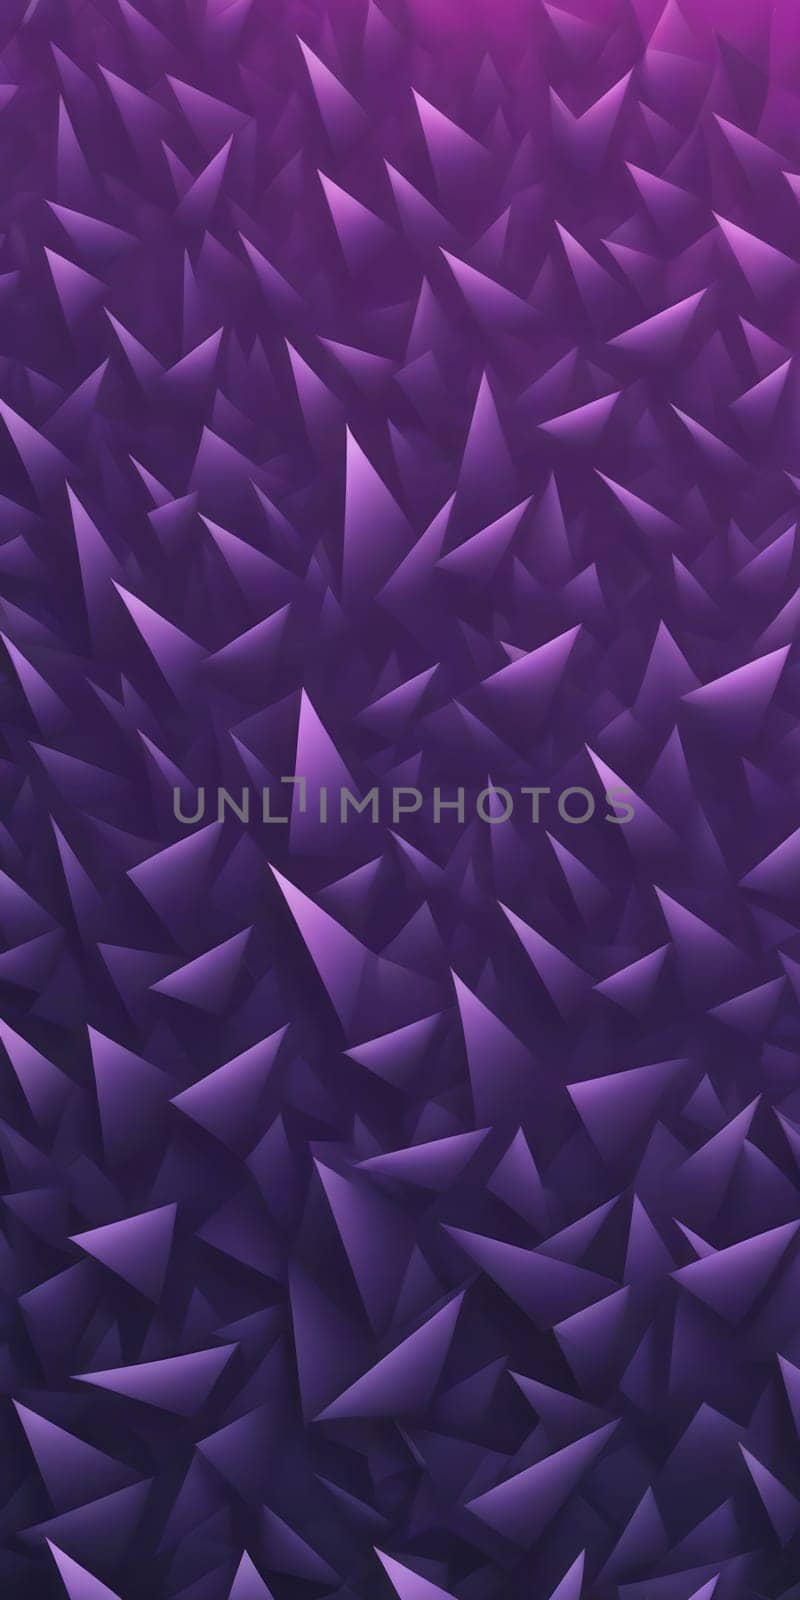 Spiked Shapes in Purple Darkgrey by nkotlyar